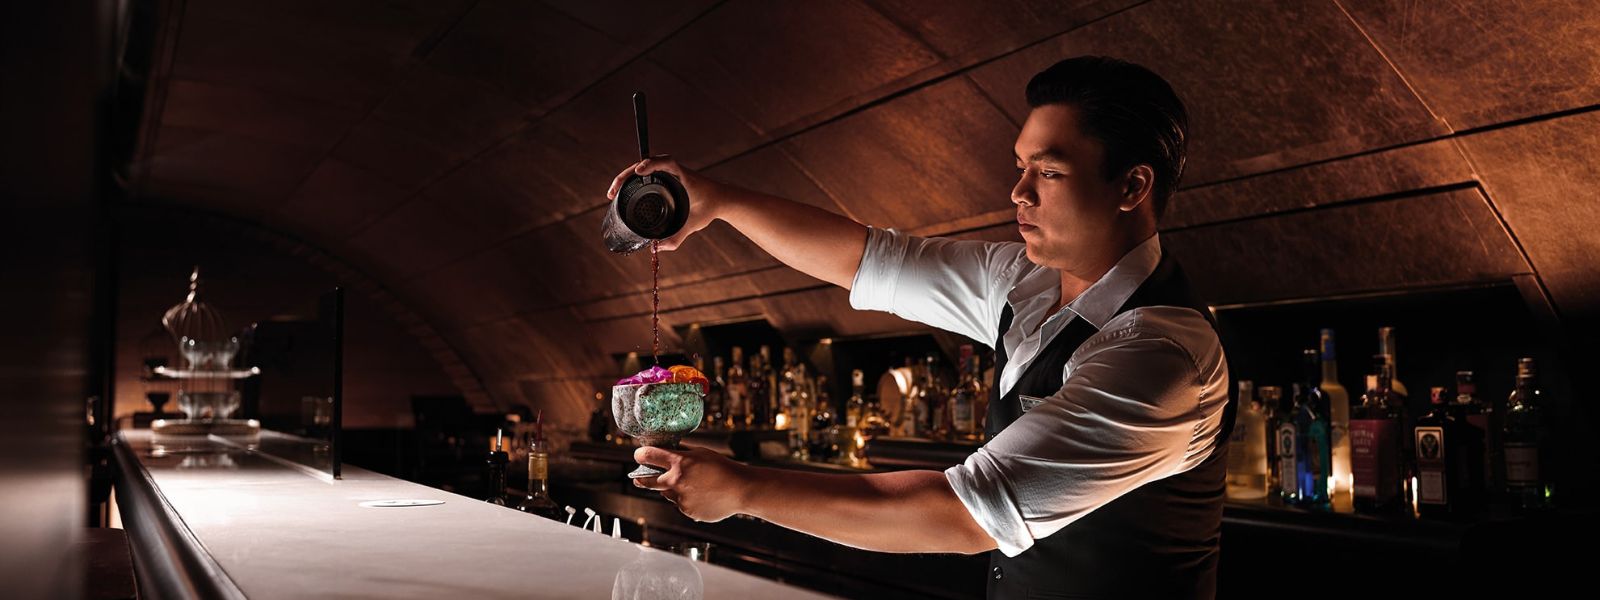 A mixologist mixing a cocktail